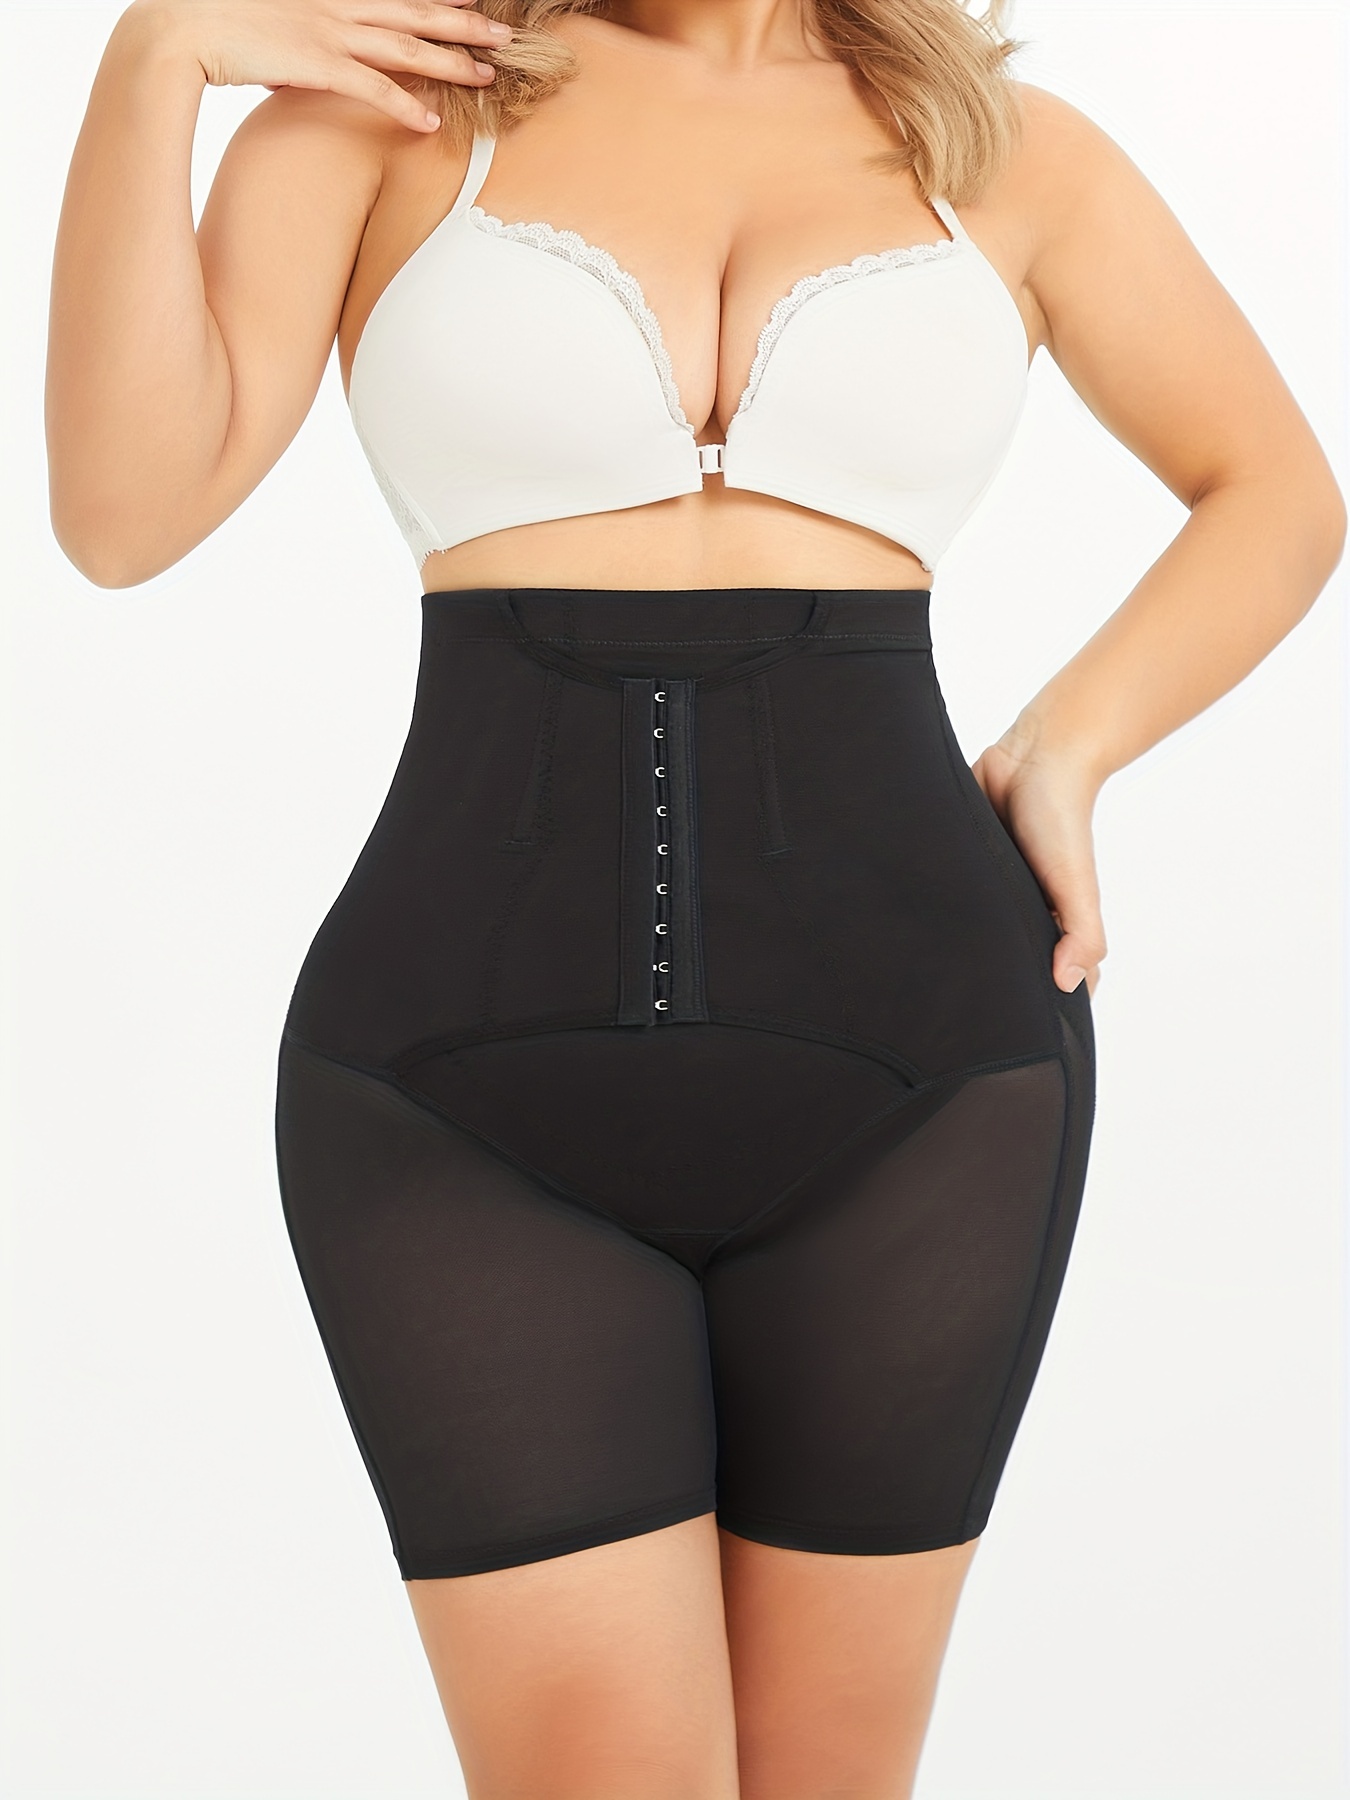 Shapewear for Women Tummy Control- High Waisted Shorts- Body Shaper for  Women- Small to Plus Sizes